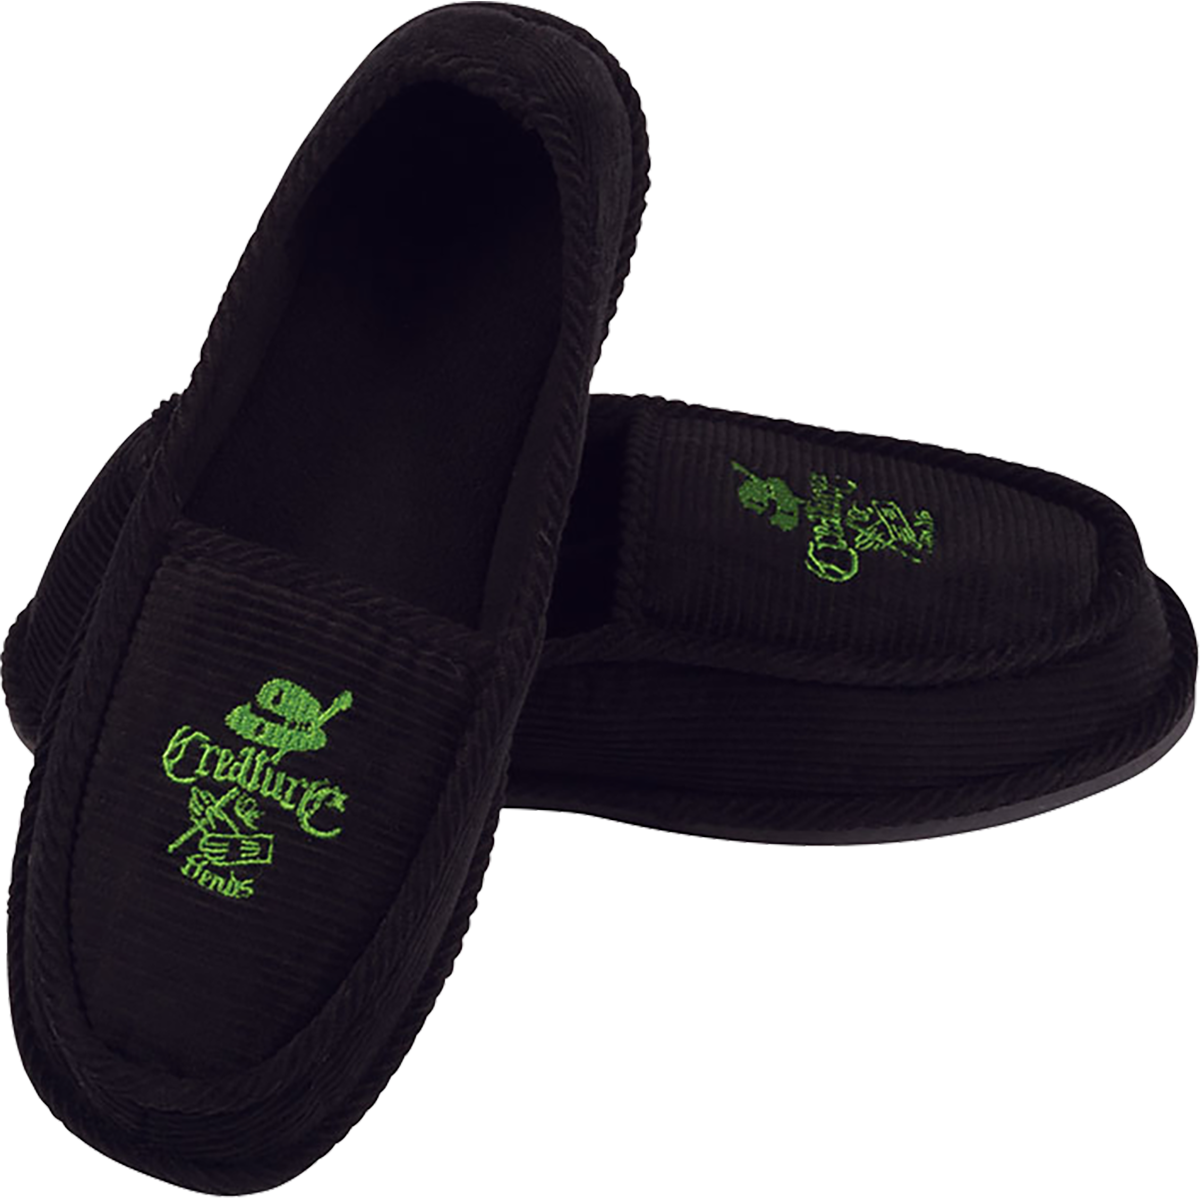 Creature Car Club Slip On Creepers Blk/grn Size - Slip-on Shoe (1200x1200)